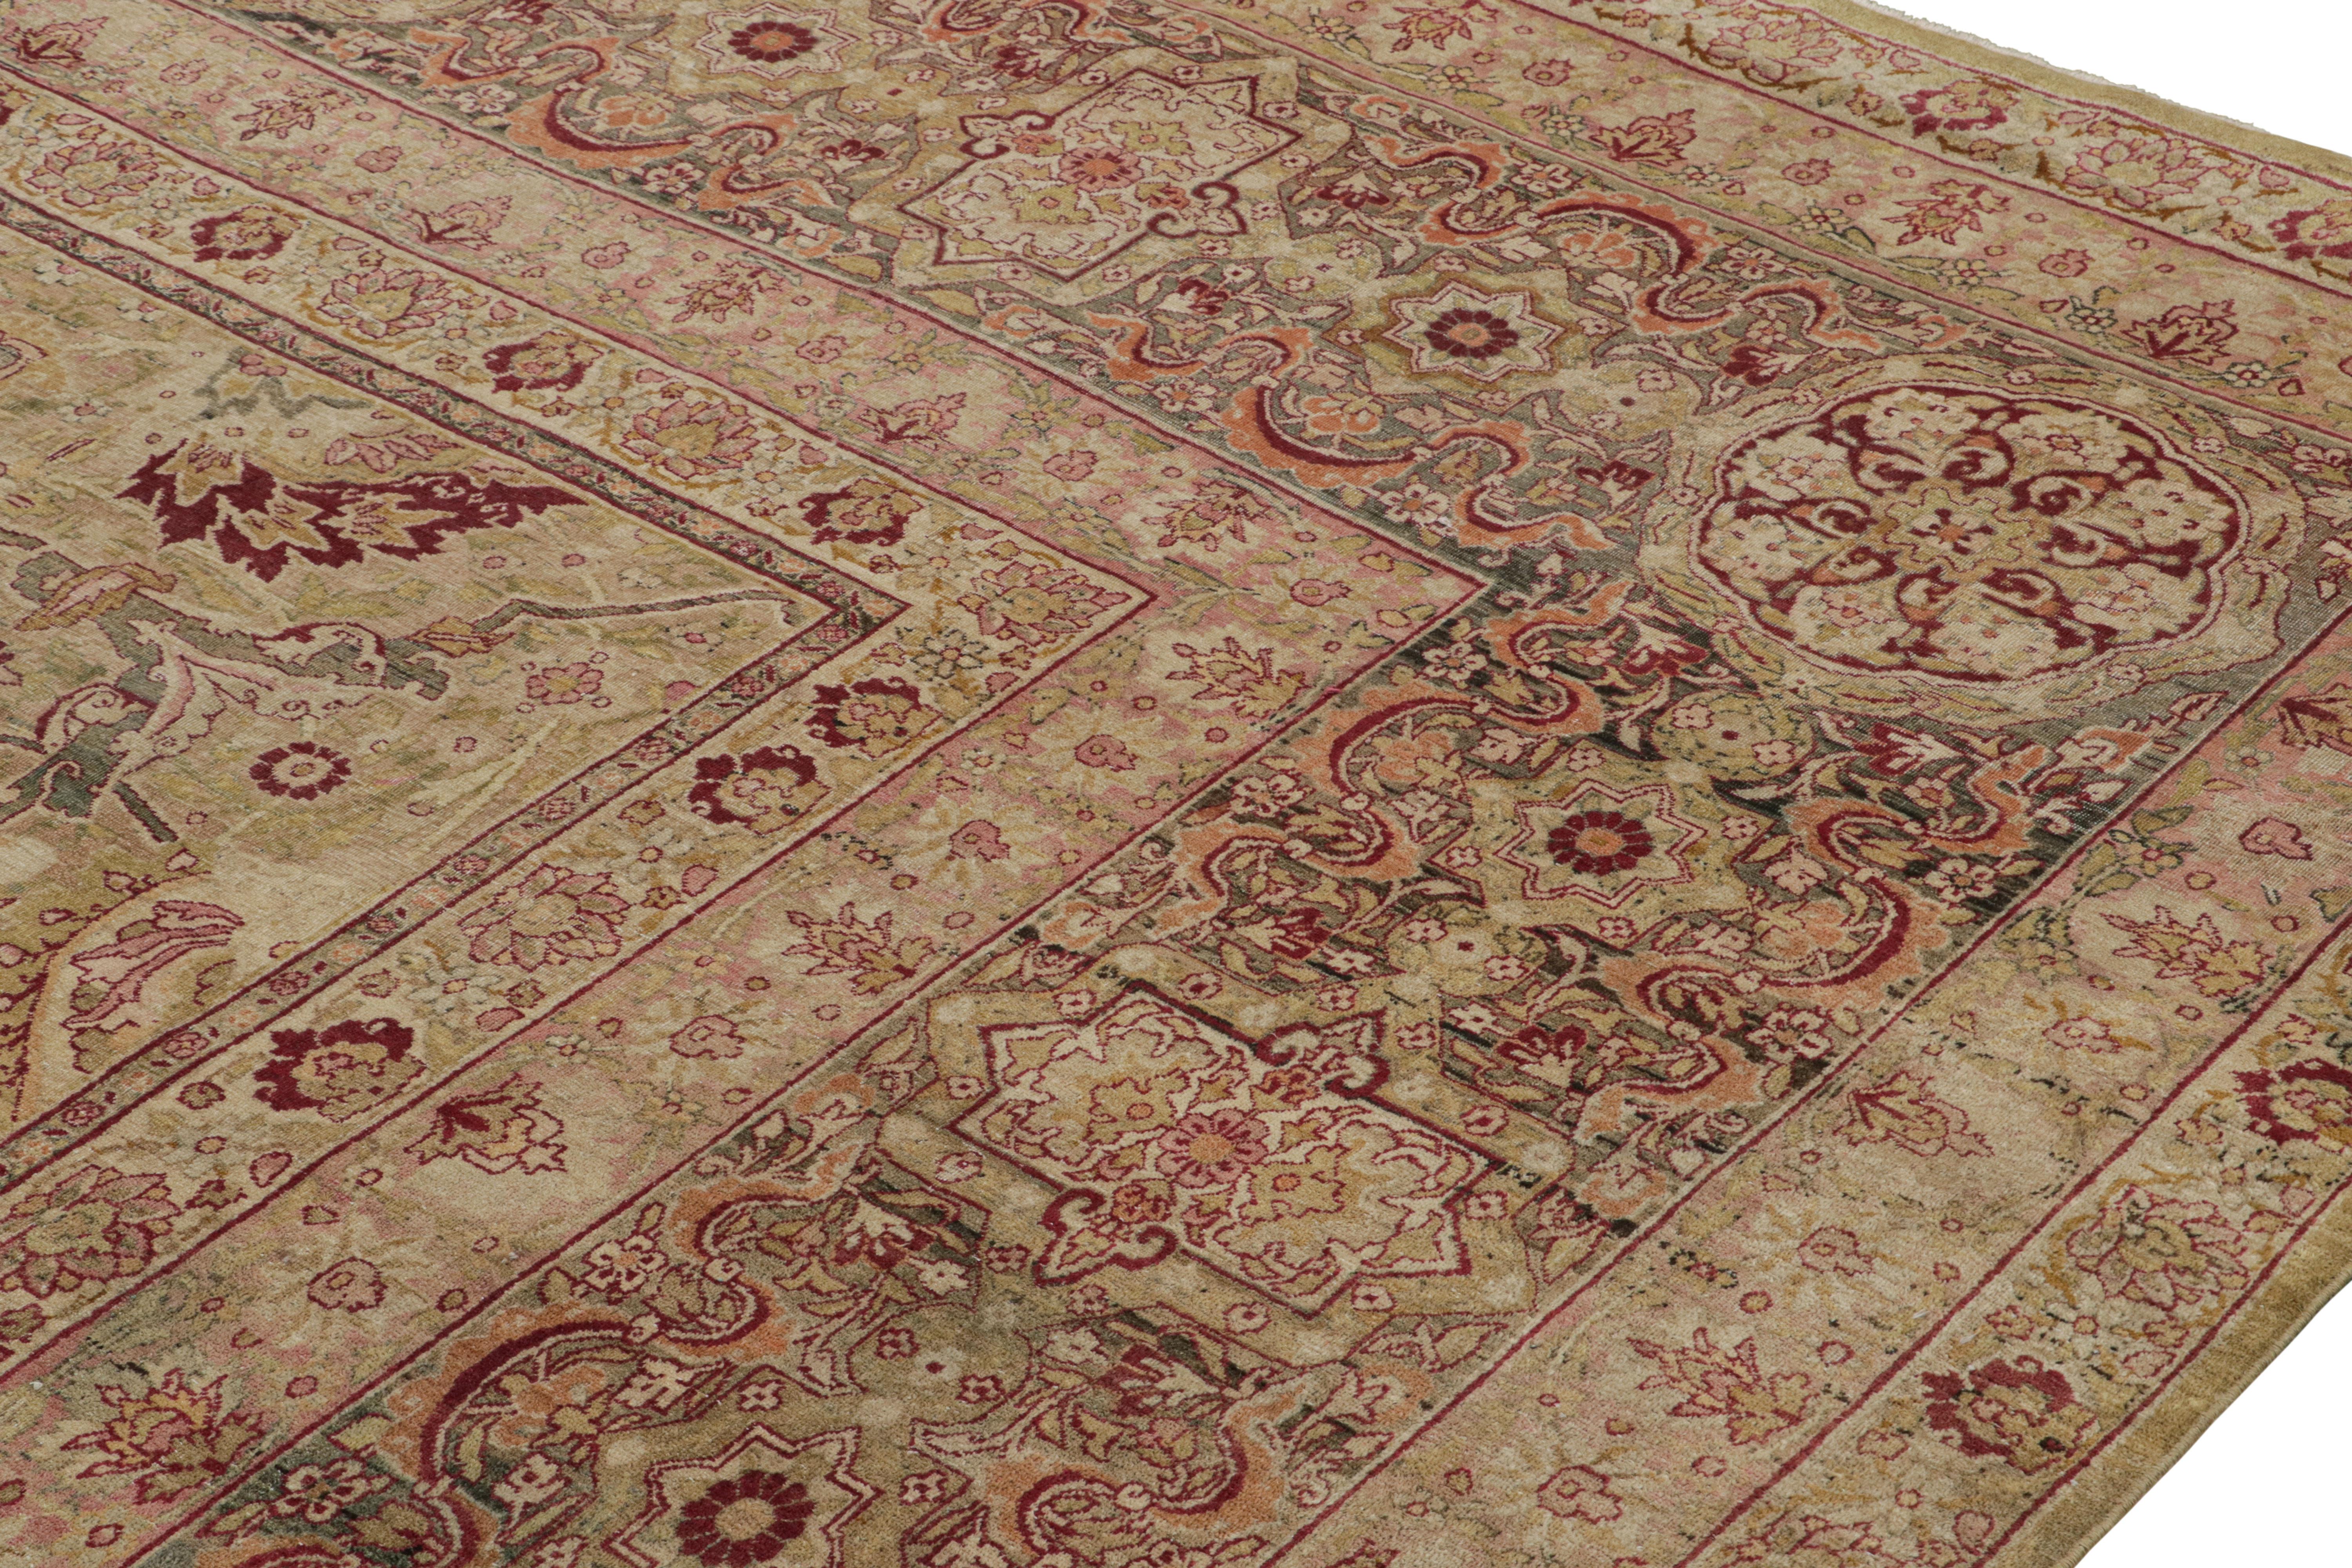 Hand-Knotted Antique Persian Kerman Lavar Rug with Floral Patterns, from Rug & Kilim For Sale